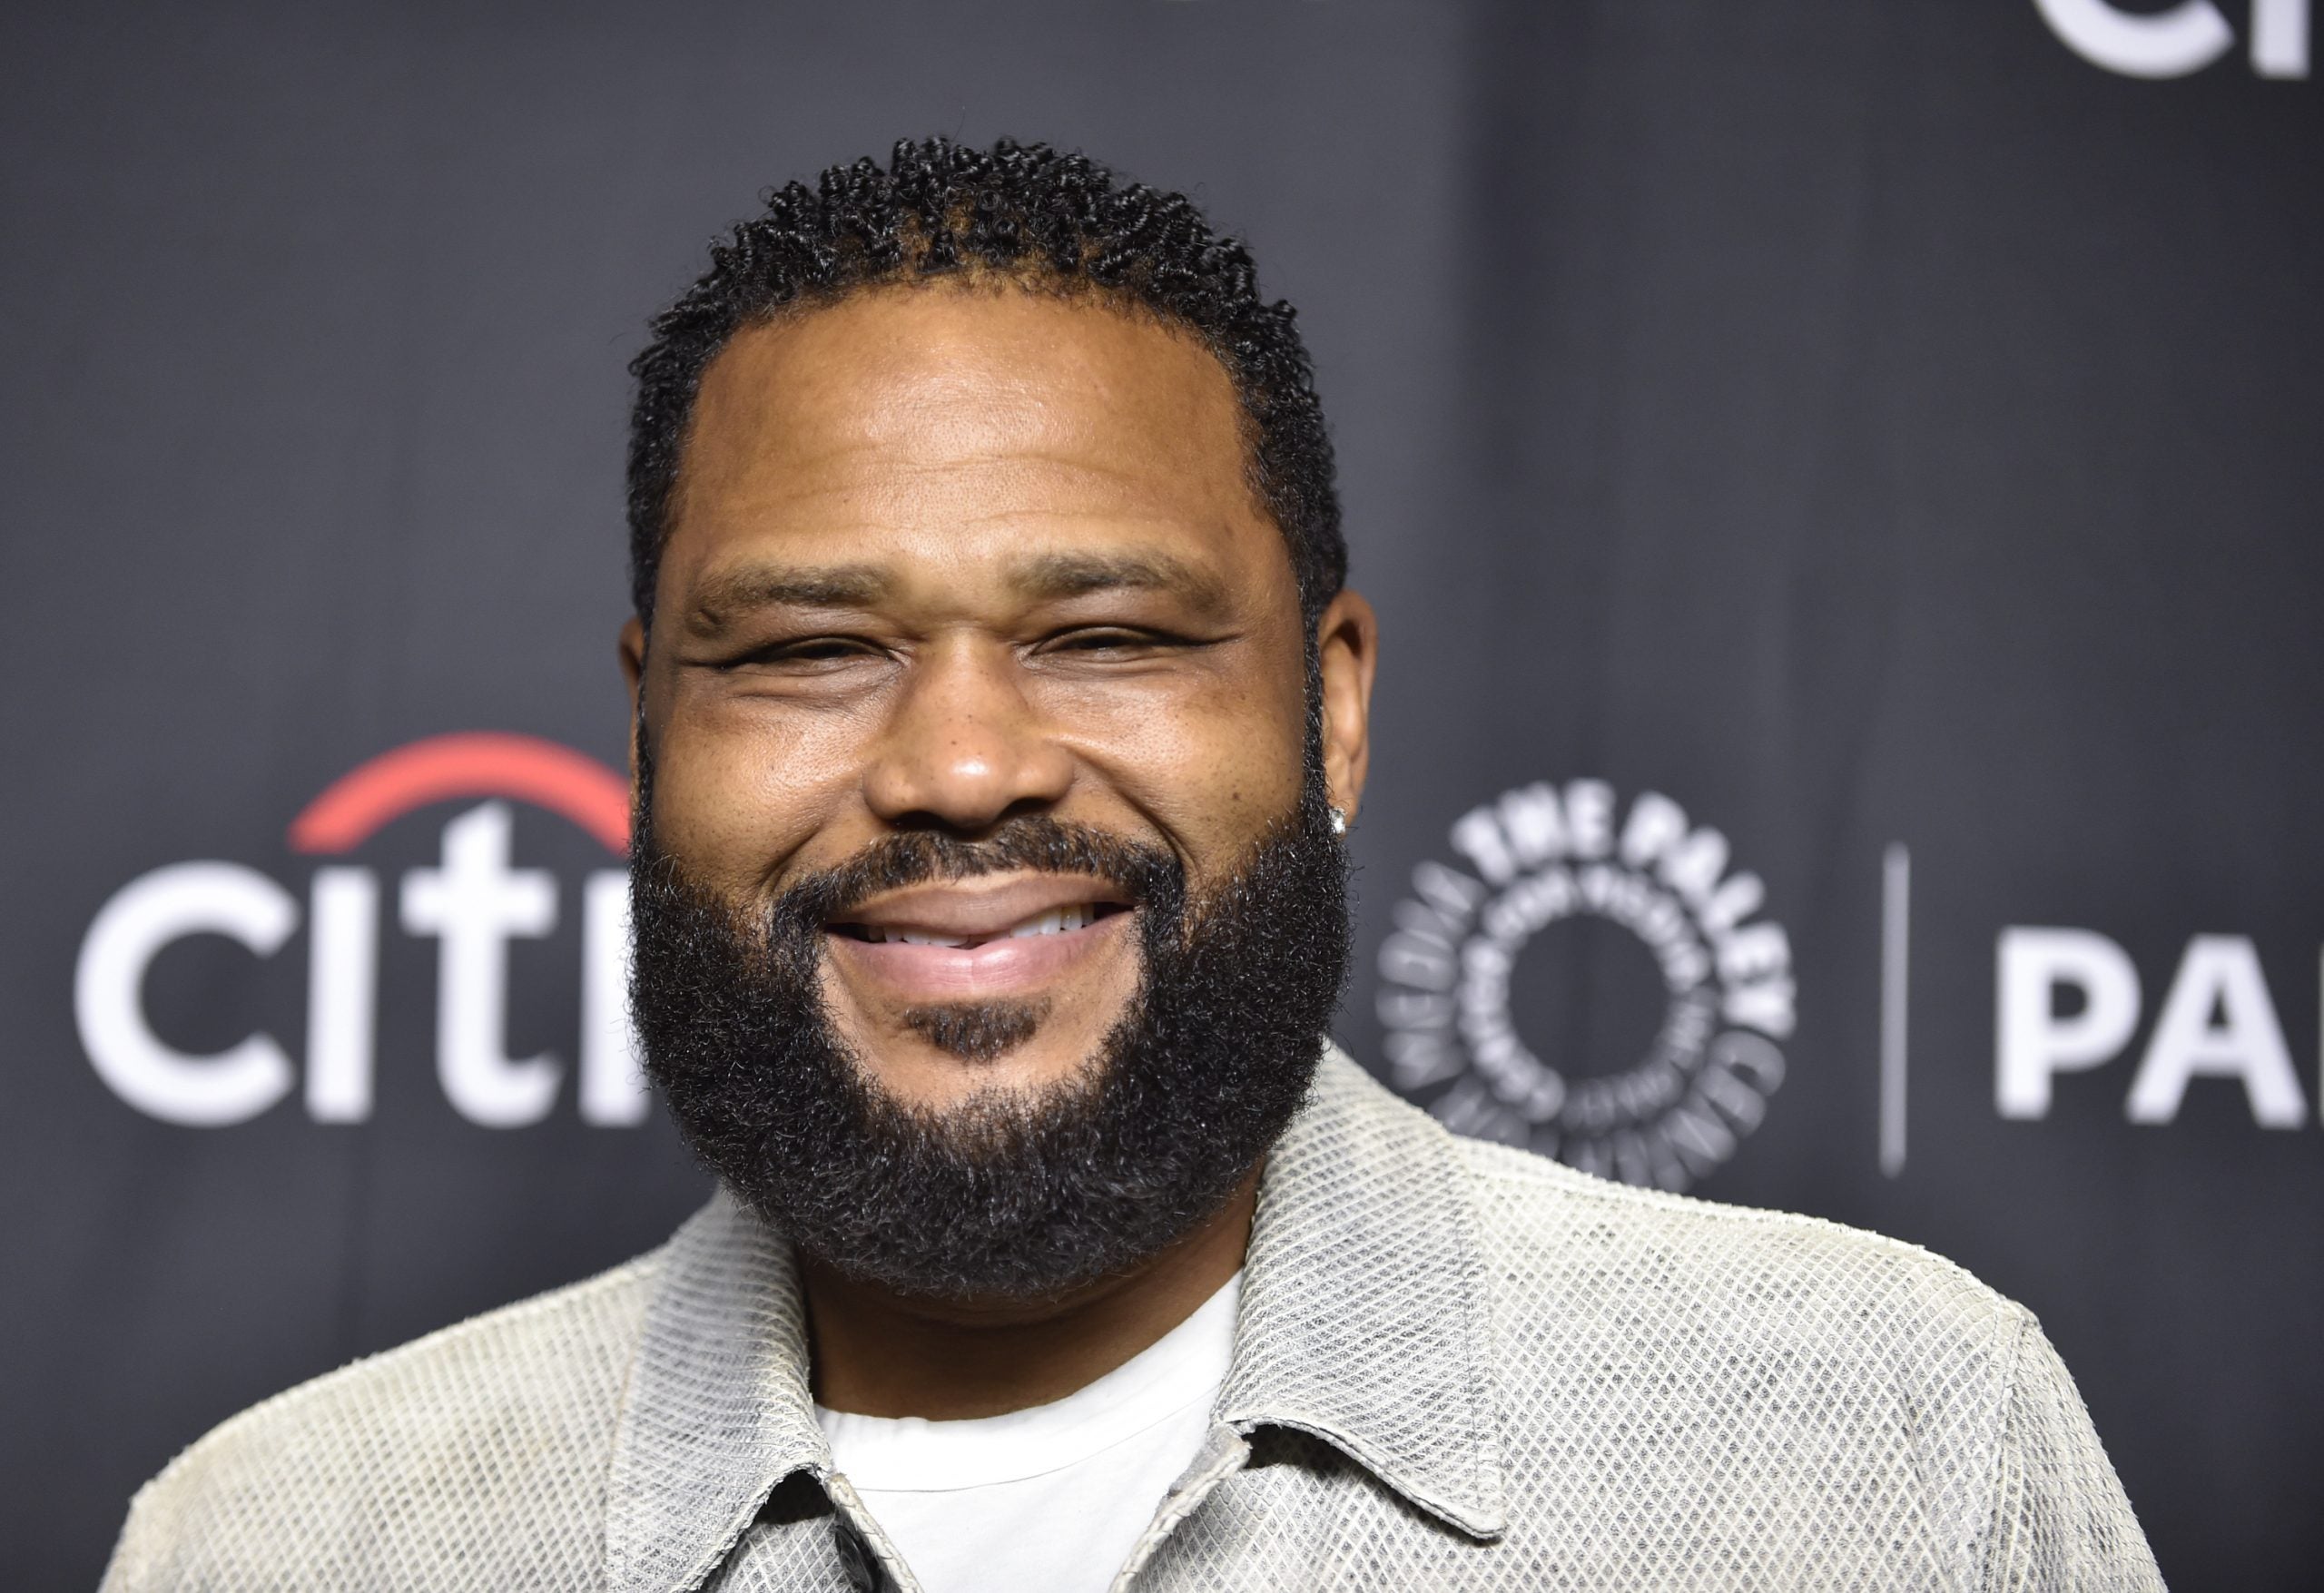 Anthony Anderson On The Mark He’s Made On TV And The Impact He Hopes To Have On Diabetes Awareness